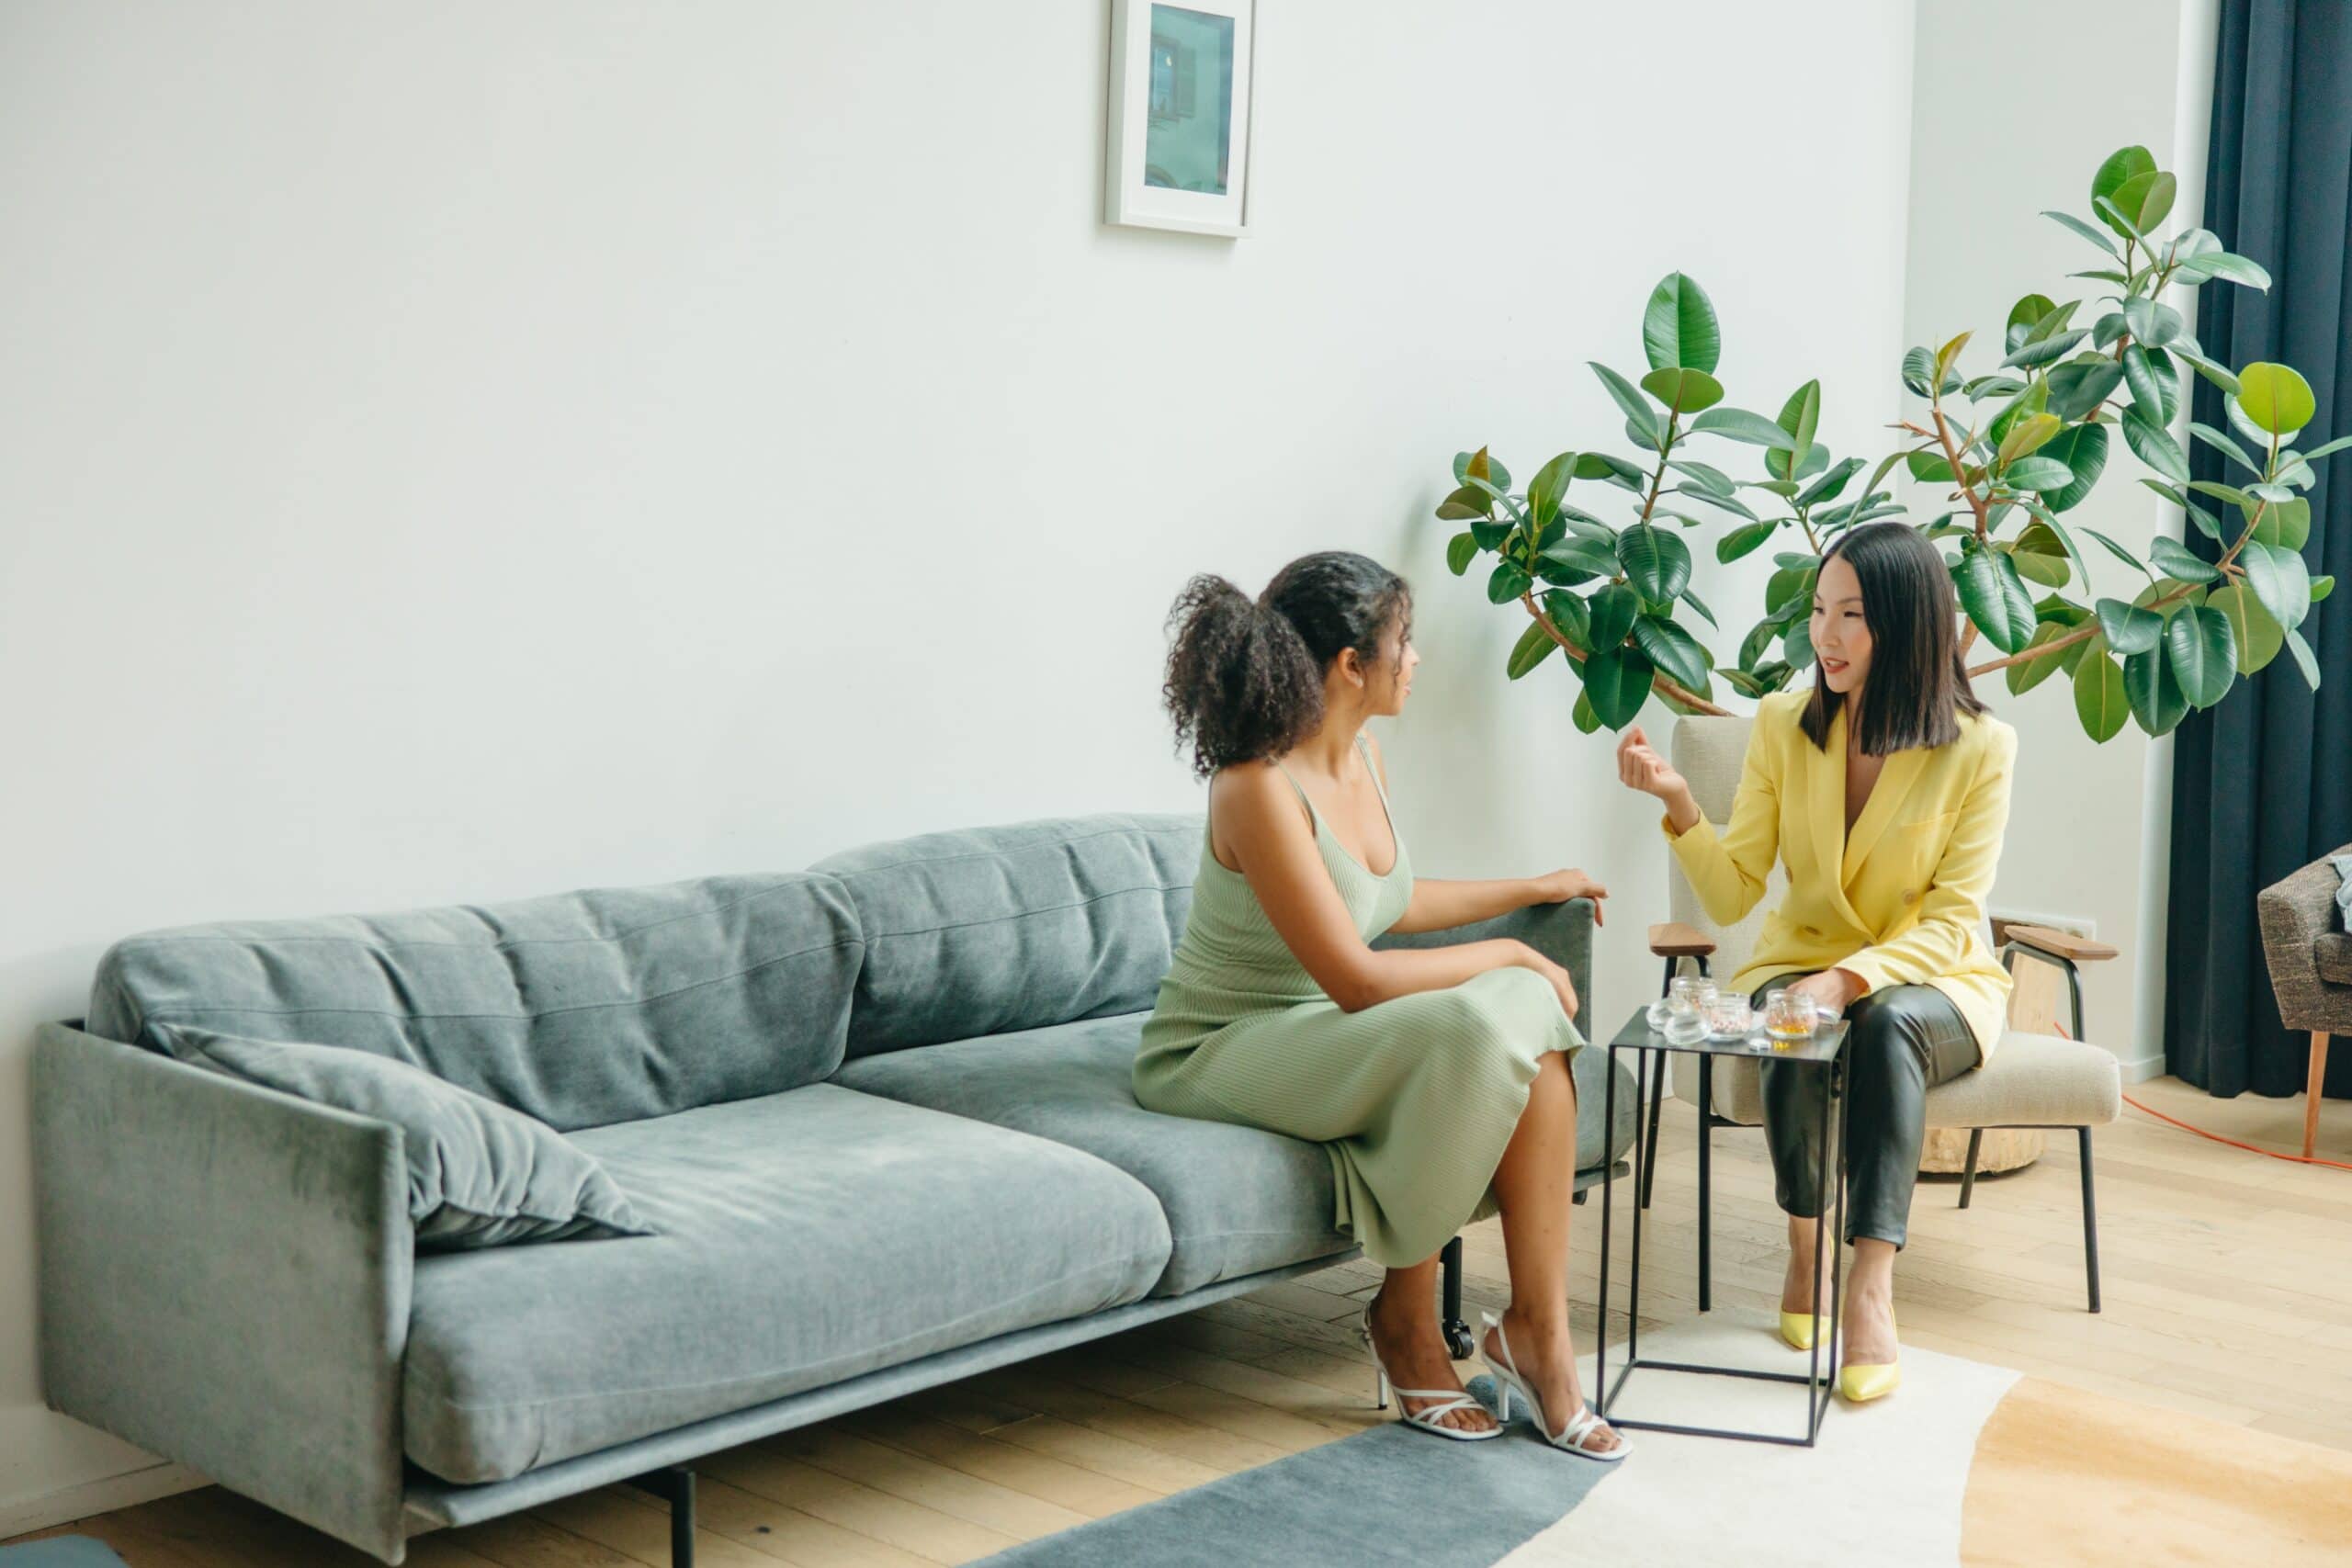 Woman in yellow blazer sitting in chair while talking to woman in sage green dress who is sitting on a couch